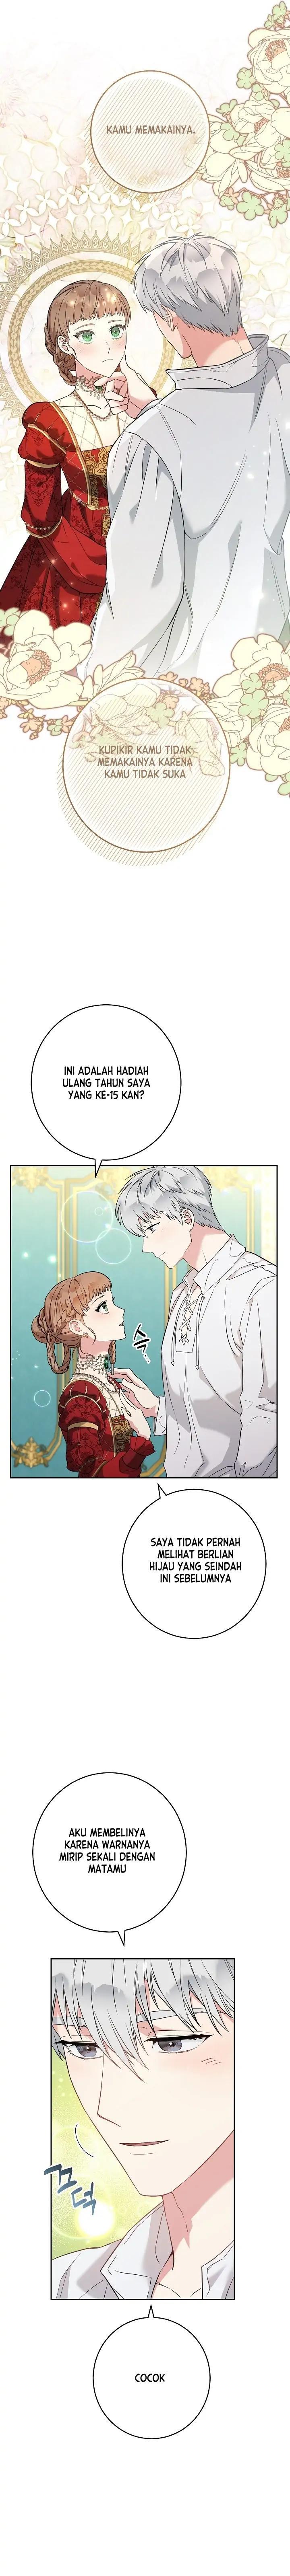 Marriage of Convenience Chapter 33